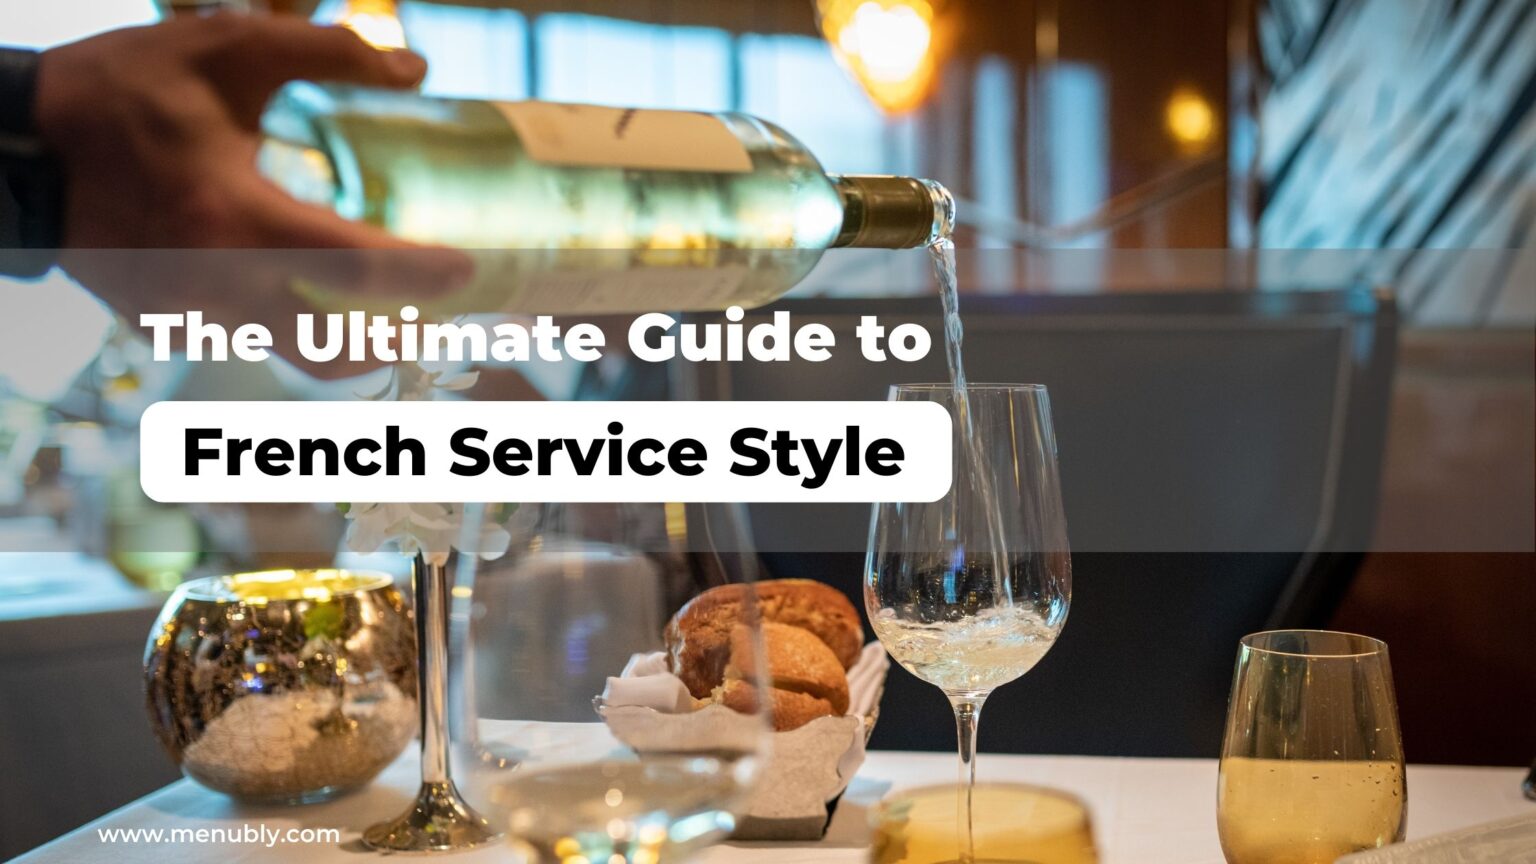 The Ultimate Guide to French Service Style - Menubly